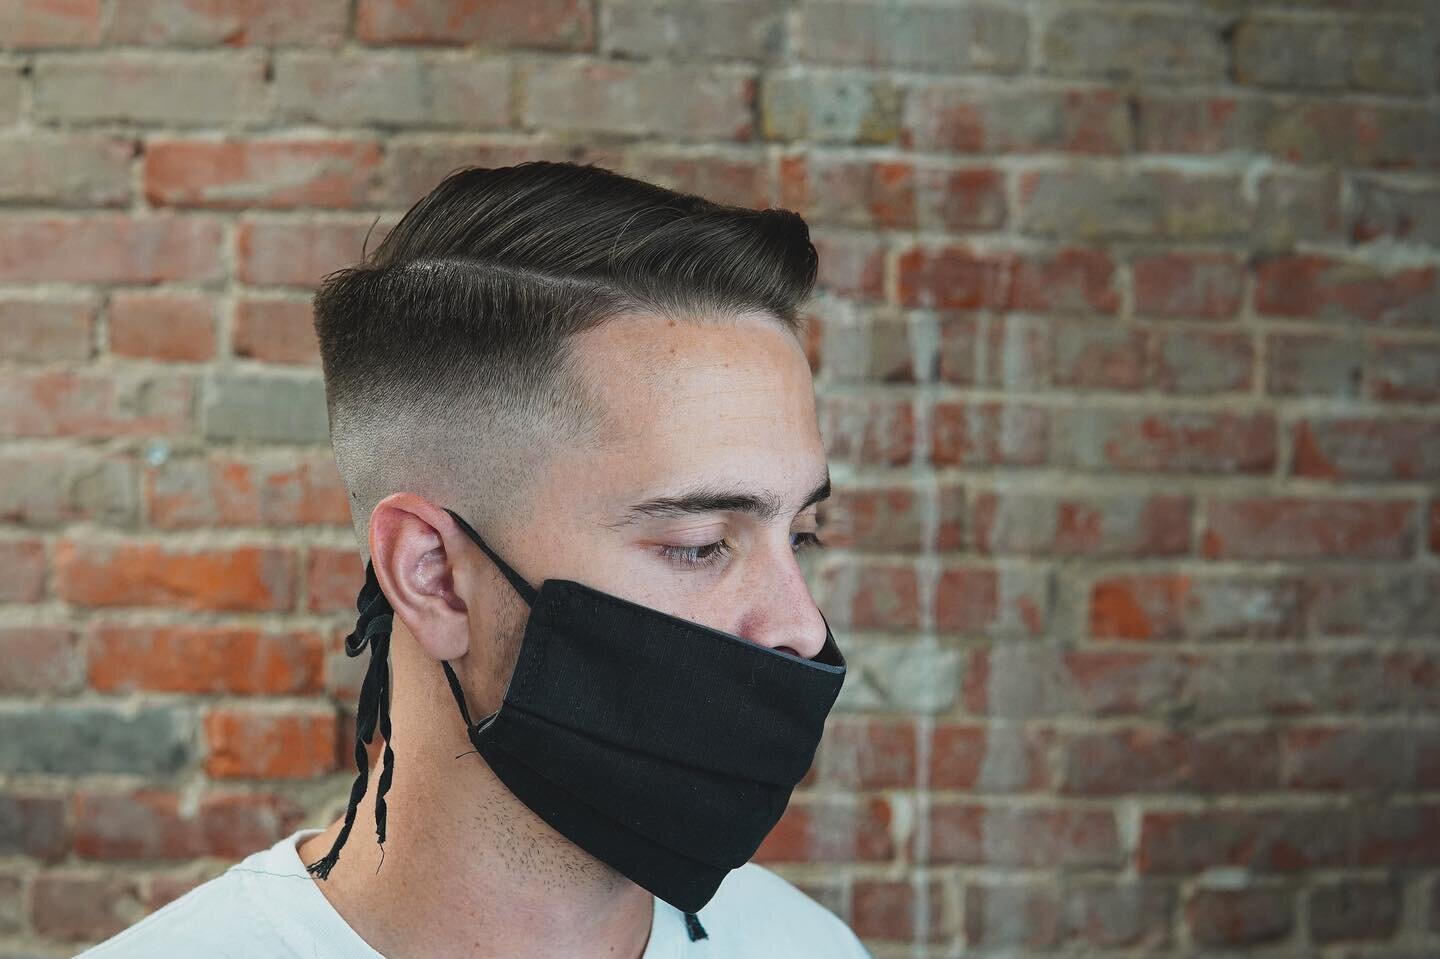 You can now schedule an appointment by hitting the book button in our bio, it is set up to book with any of the barbers. Cut by @jaymillticket styled with @tiptoppomade matte